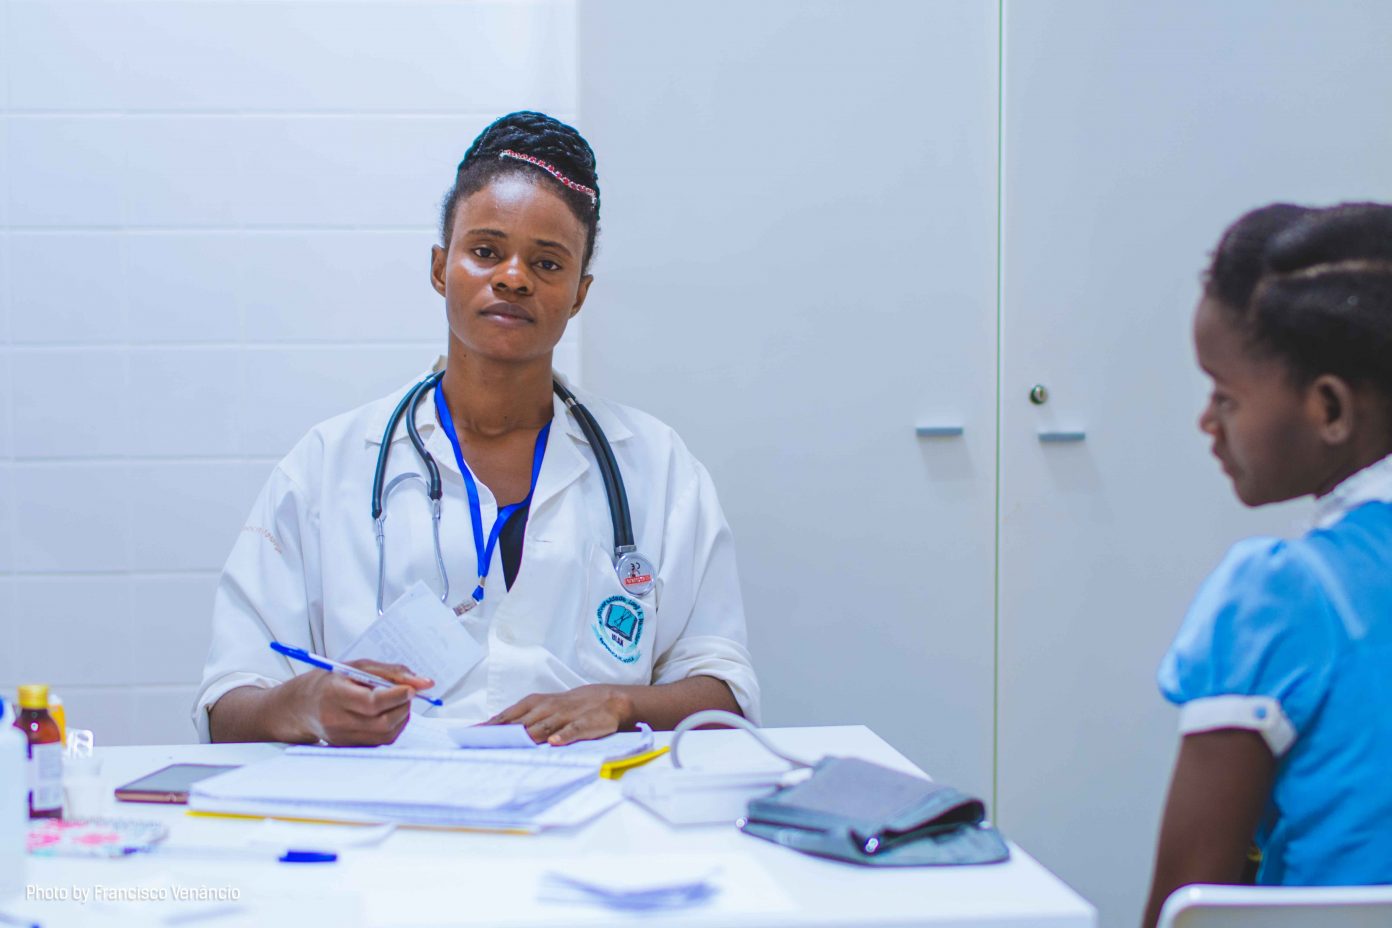 Nurse From A Private School Of Nursing In Lagos 1392x928 